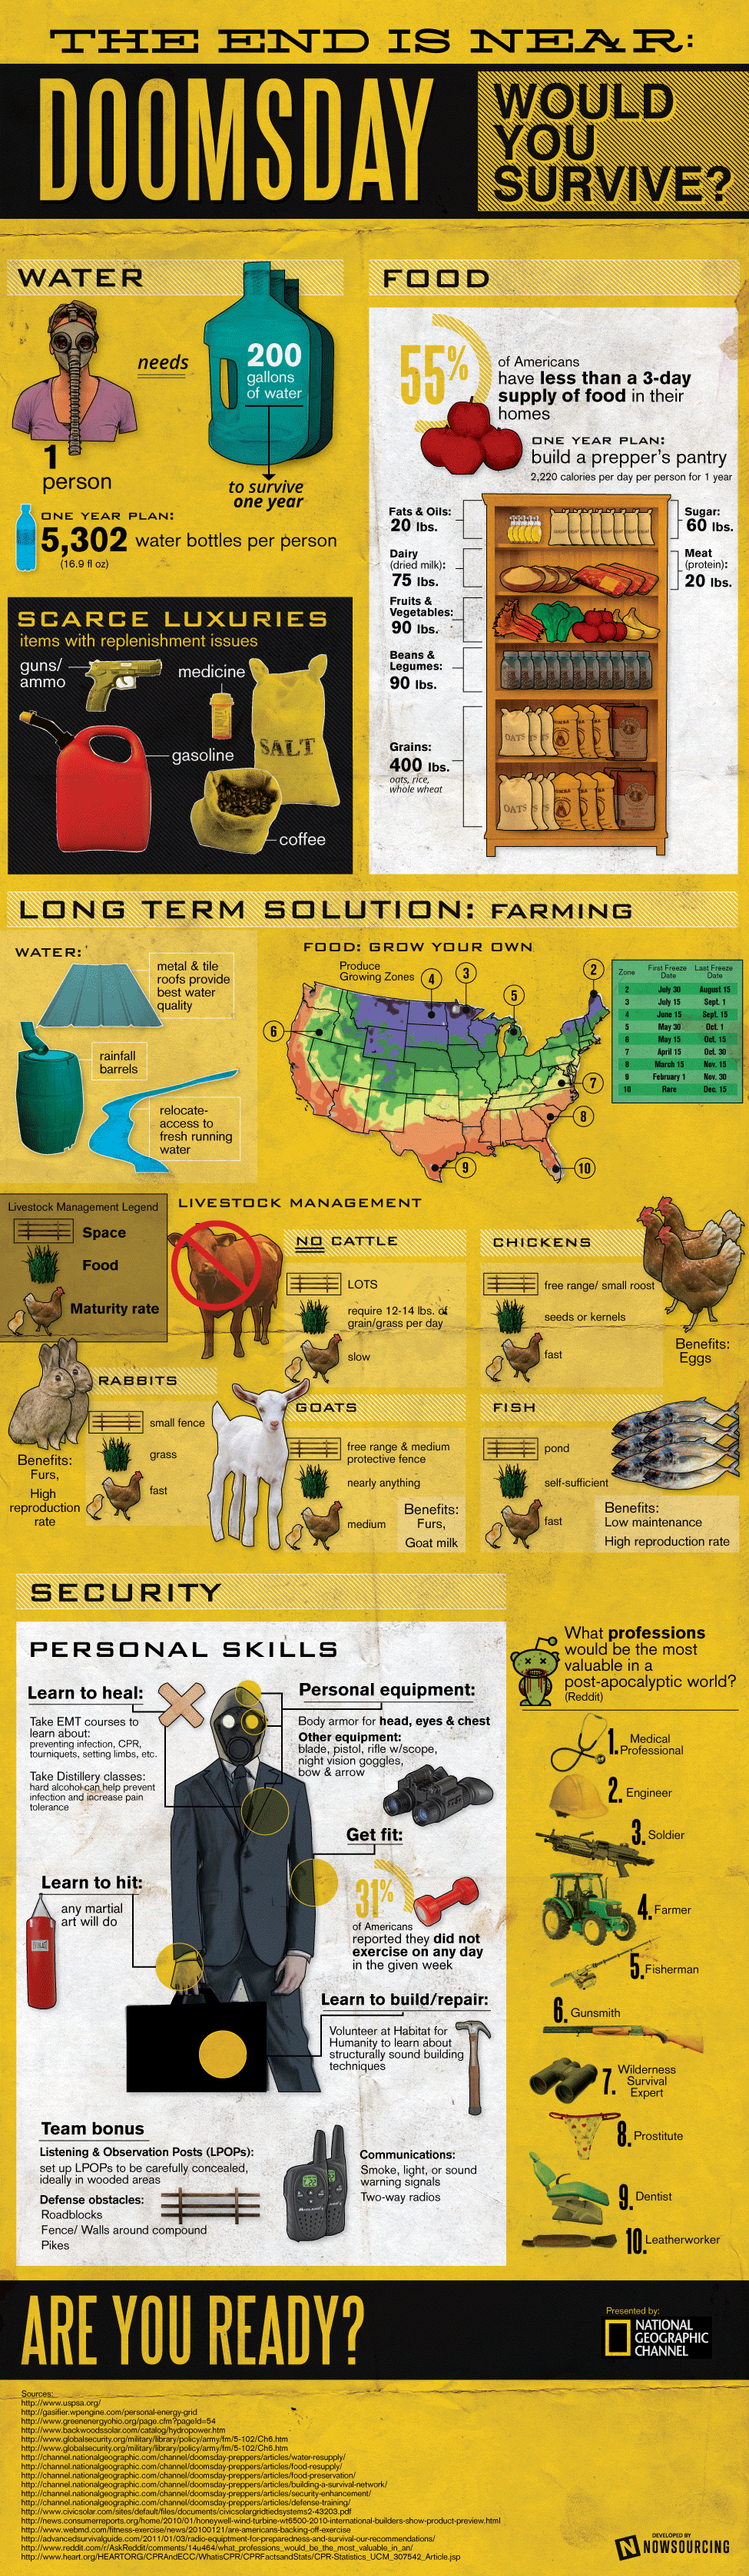 Doomsday preppers survival guide infographic